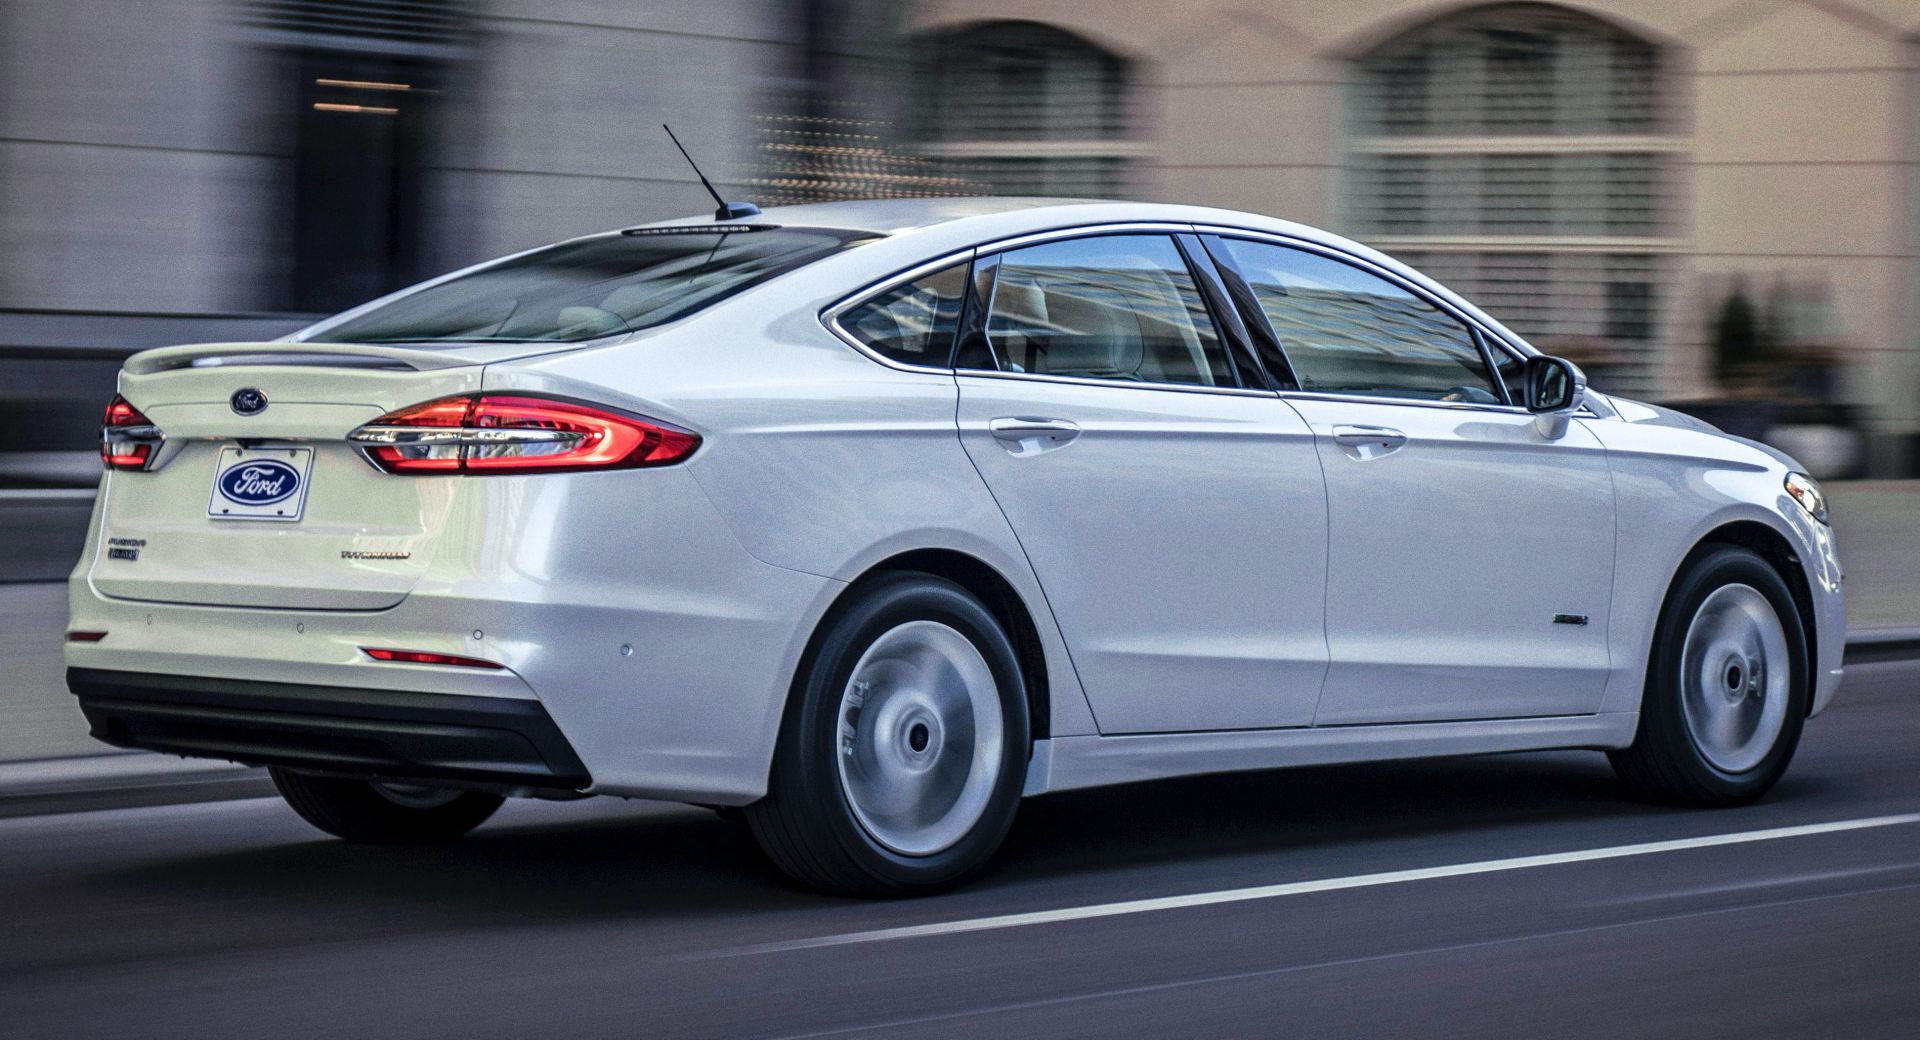 Ford Stopped Making The Fusion, Its Last Sedan In The U.S., On July 31